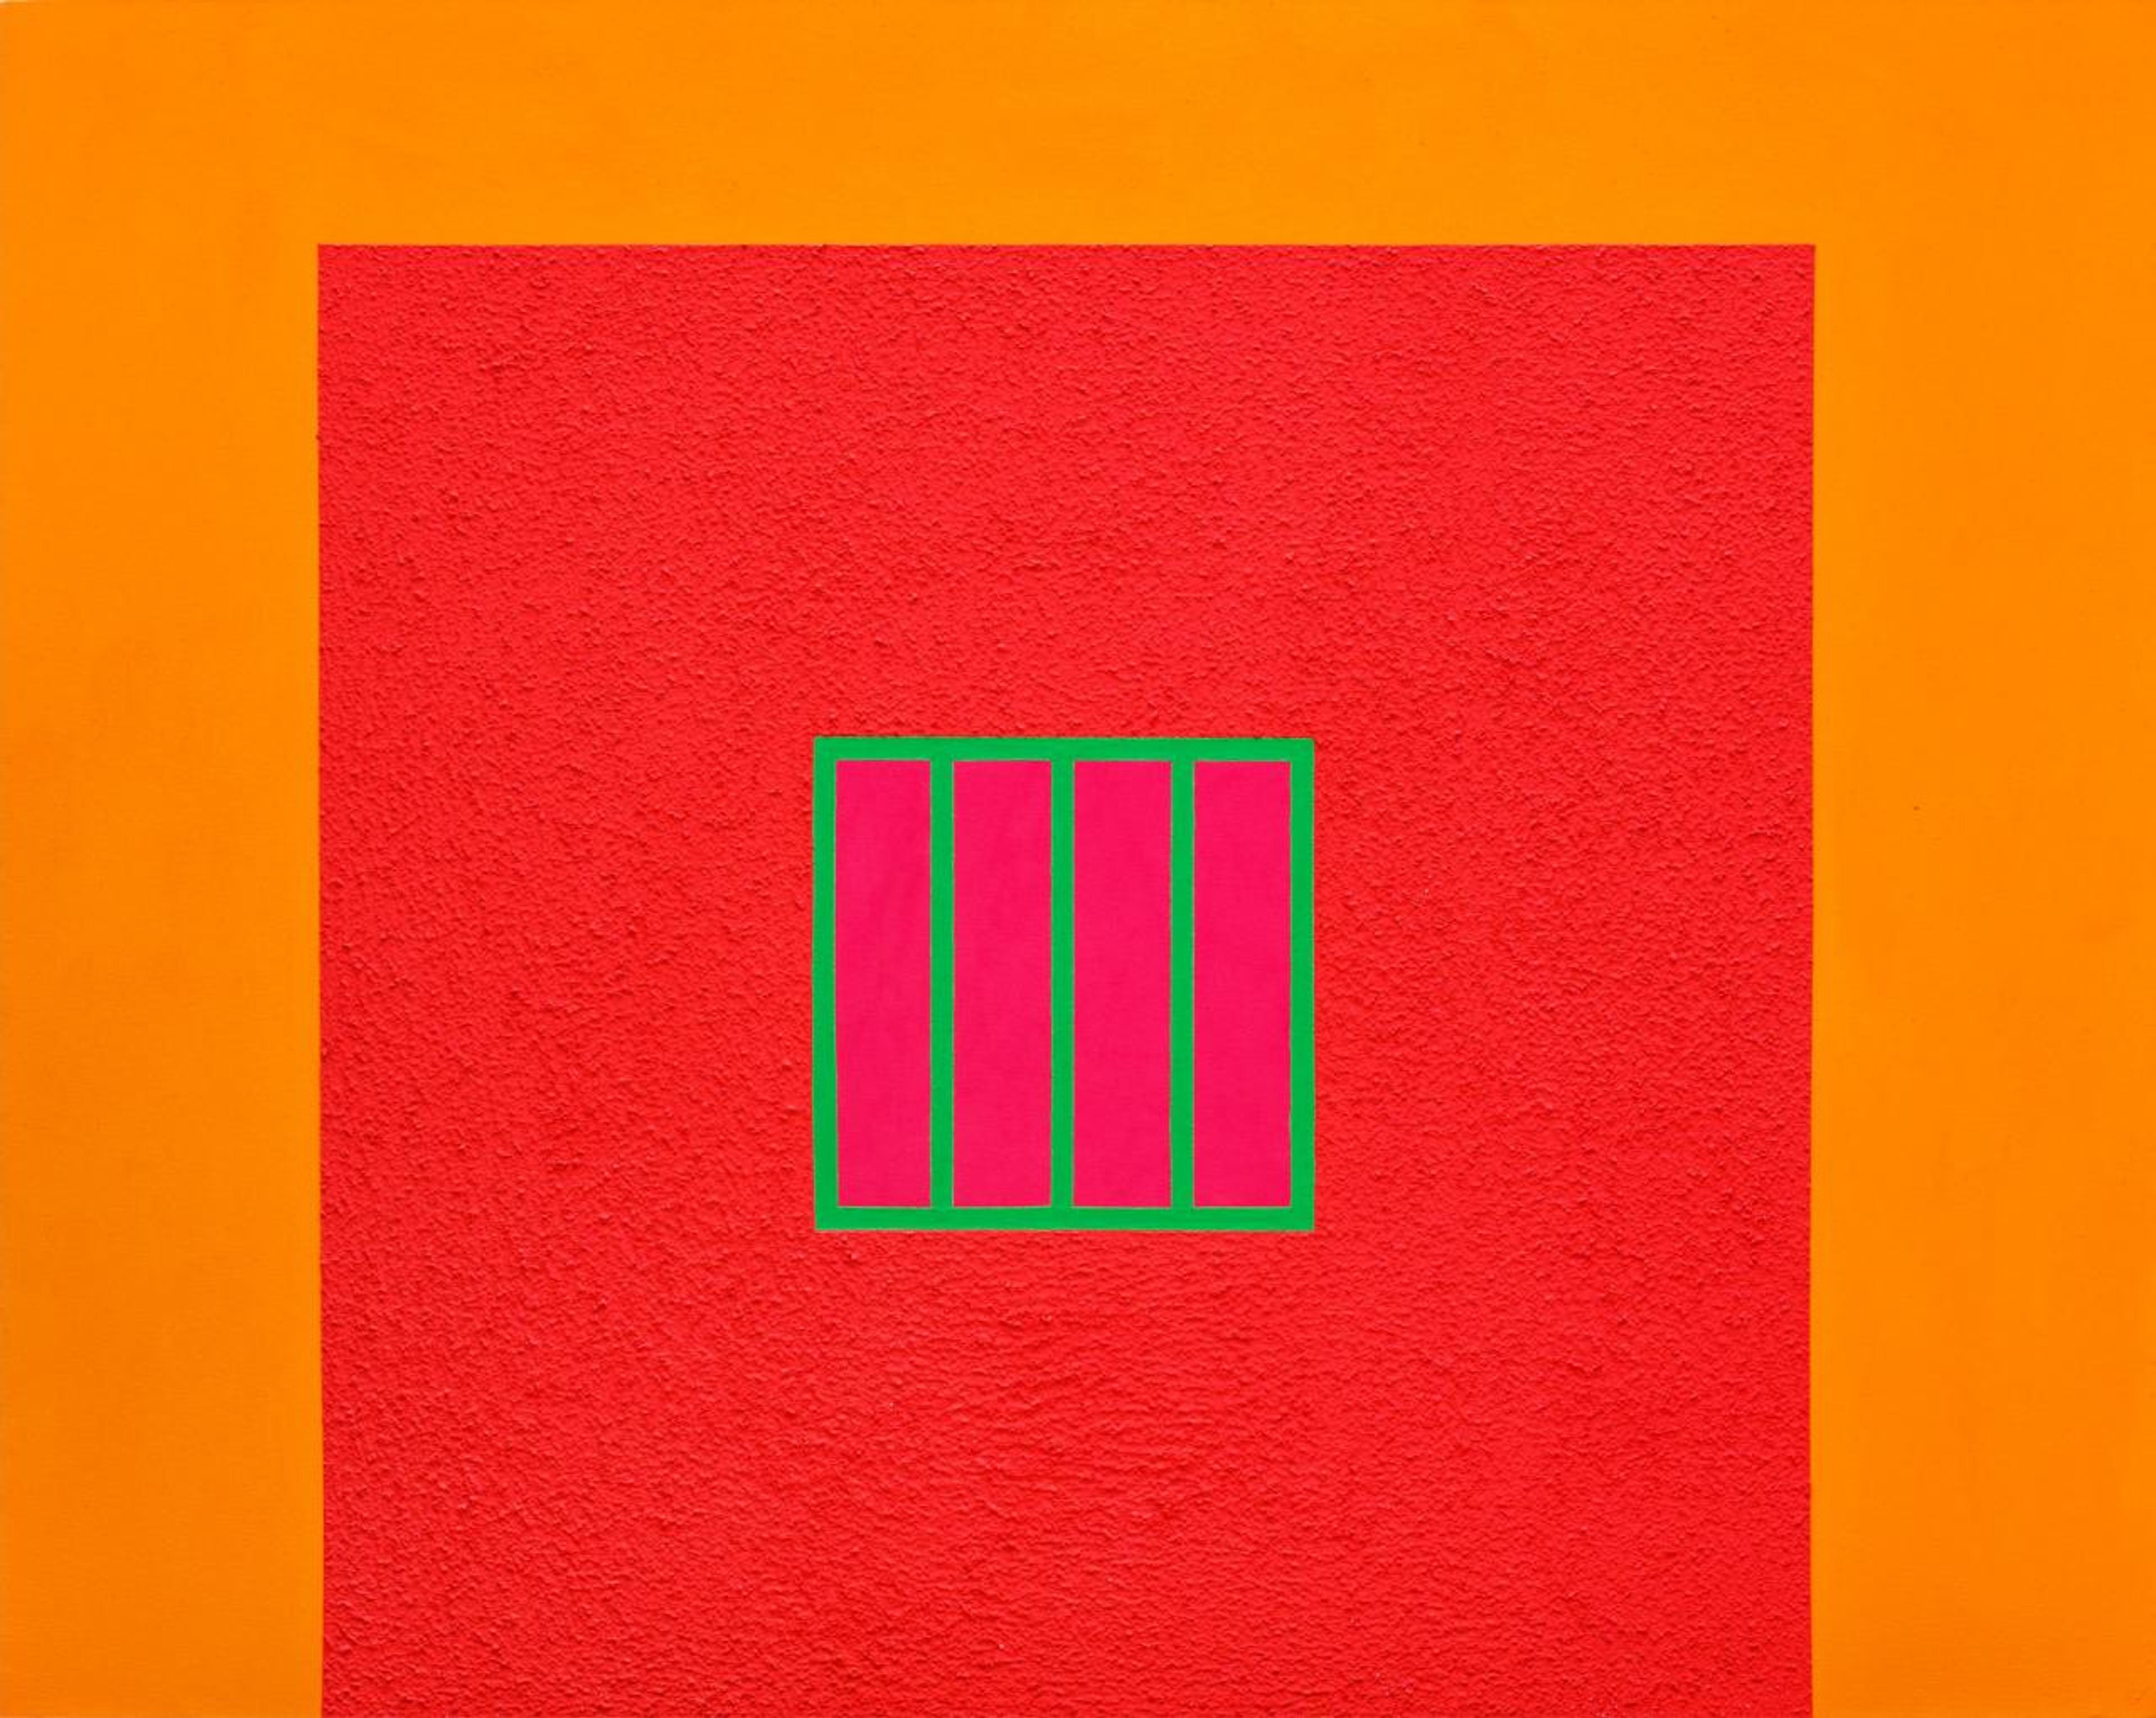 Peter Halley, Day-Glo Prison, 1982, fluorescent acrylic and Roll-a-Tex on canvas, 160 x 196 cm